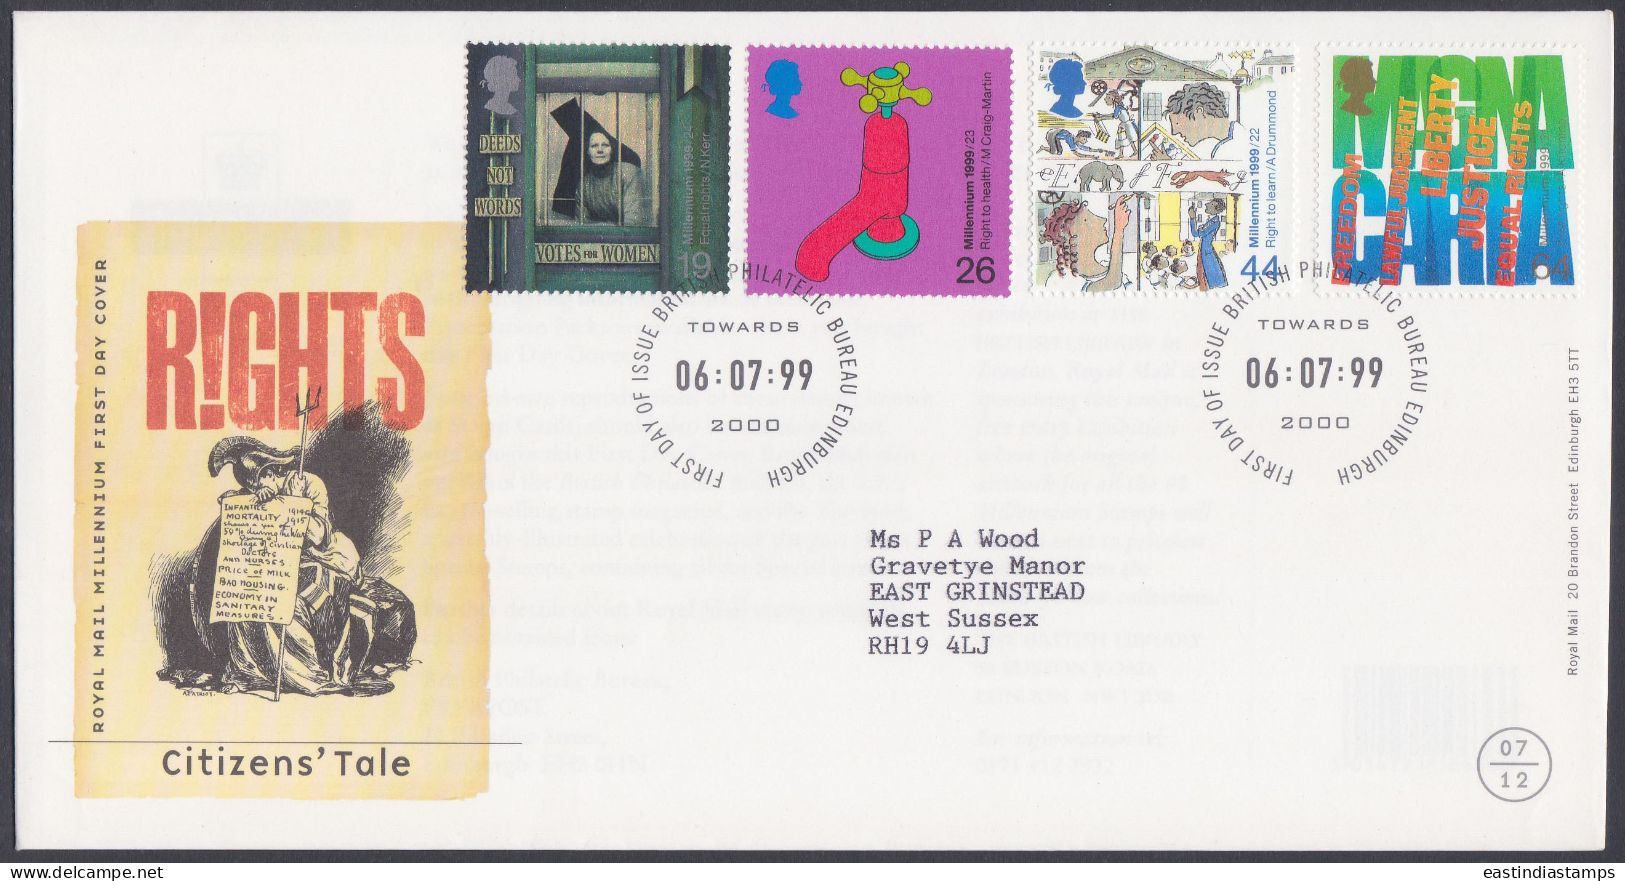 GB Great Britain 1999 FDC Citizens' Tale, Women's Right, Universal Franchise, Rights Pictorial Postmark, First Day Cover - Covers & Documents